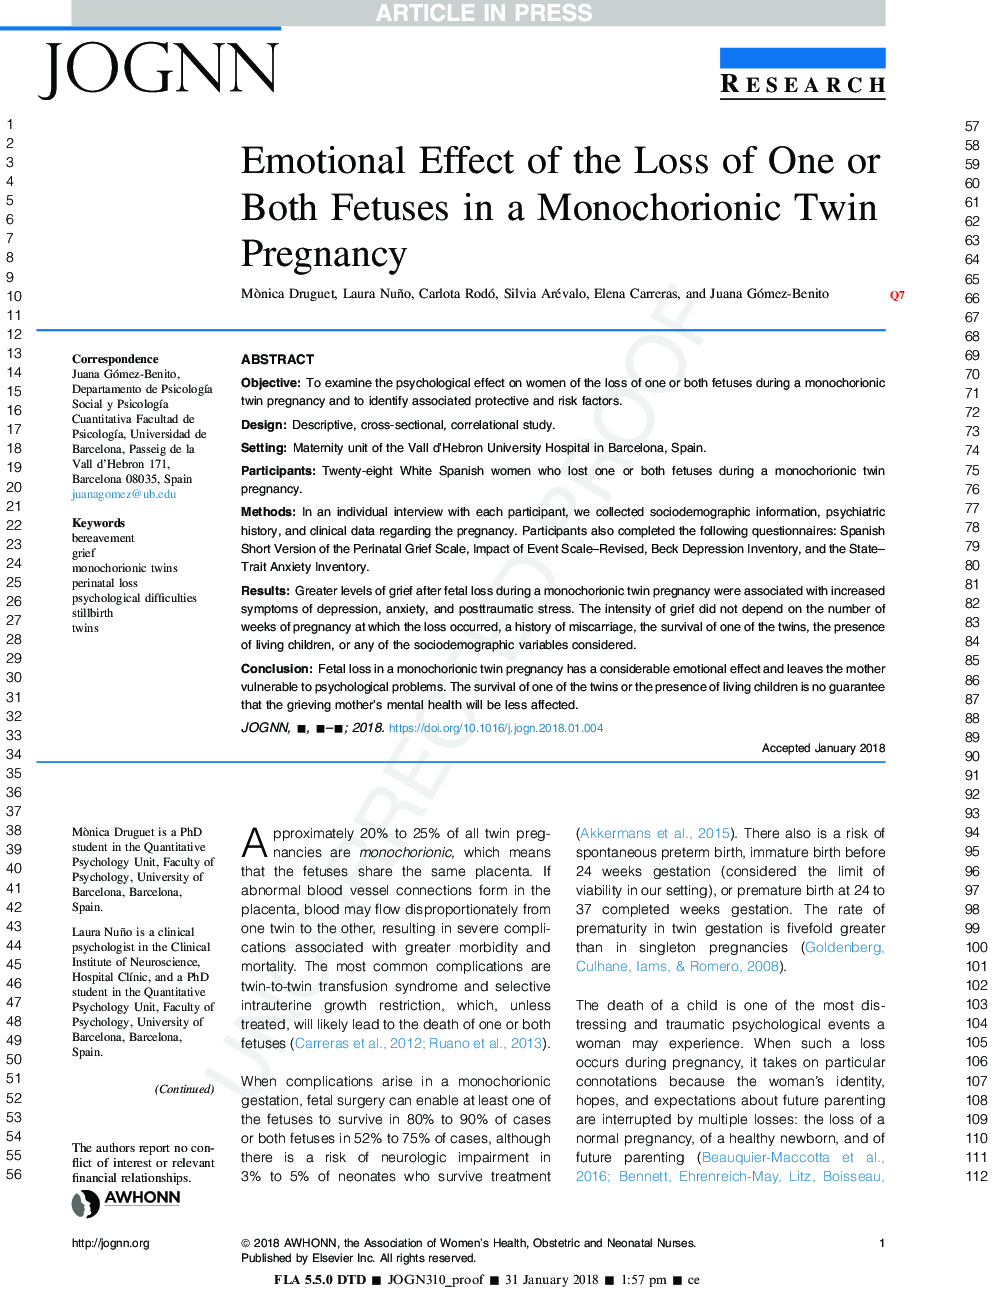 Emotional Effect of the Loss of One or Both Fetuses in a Monochorionic Twin Pregnancy